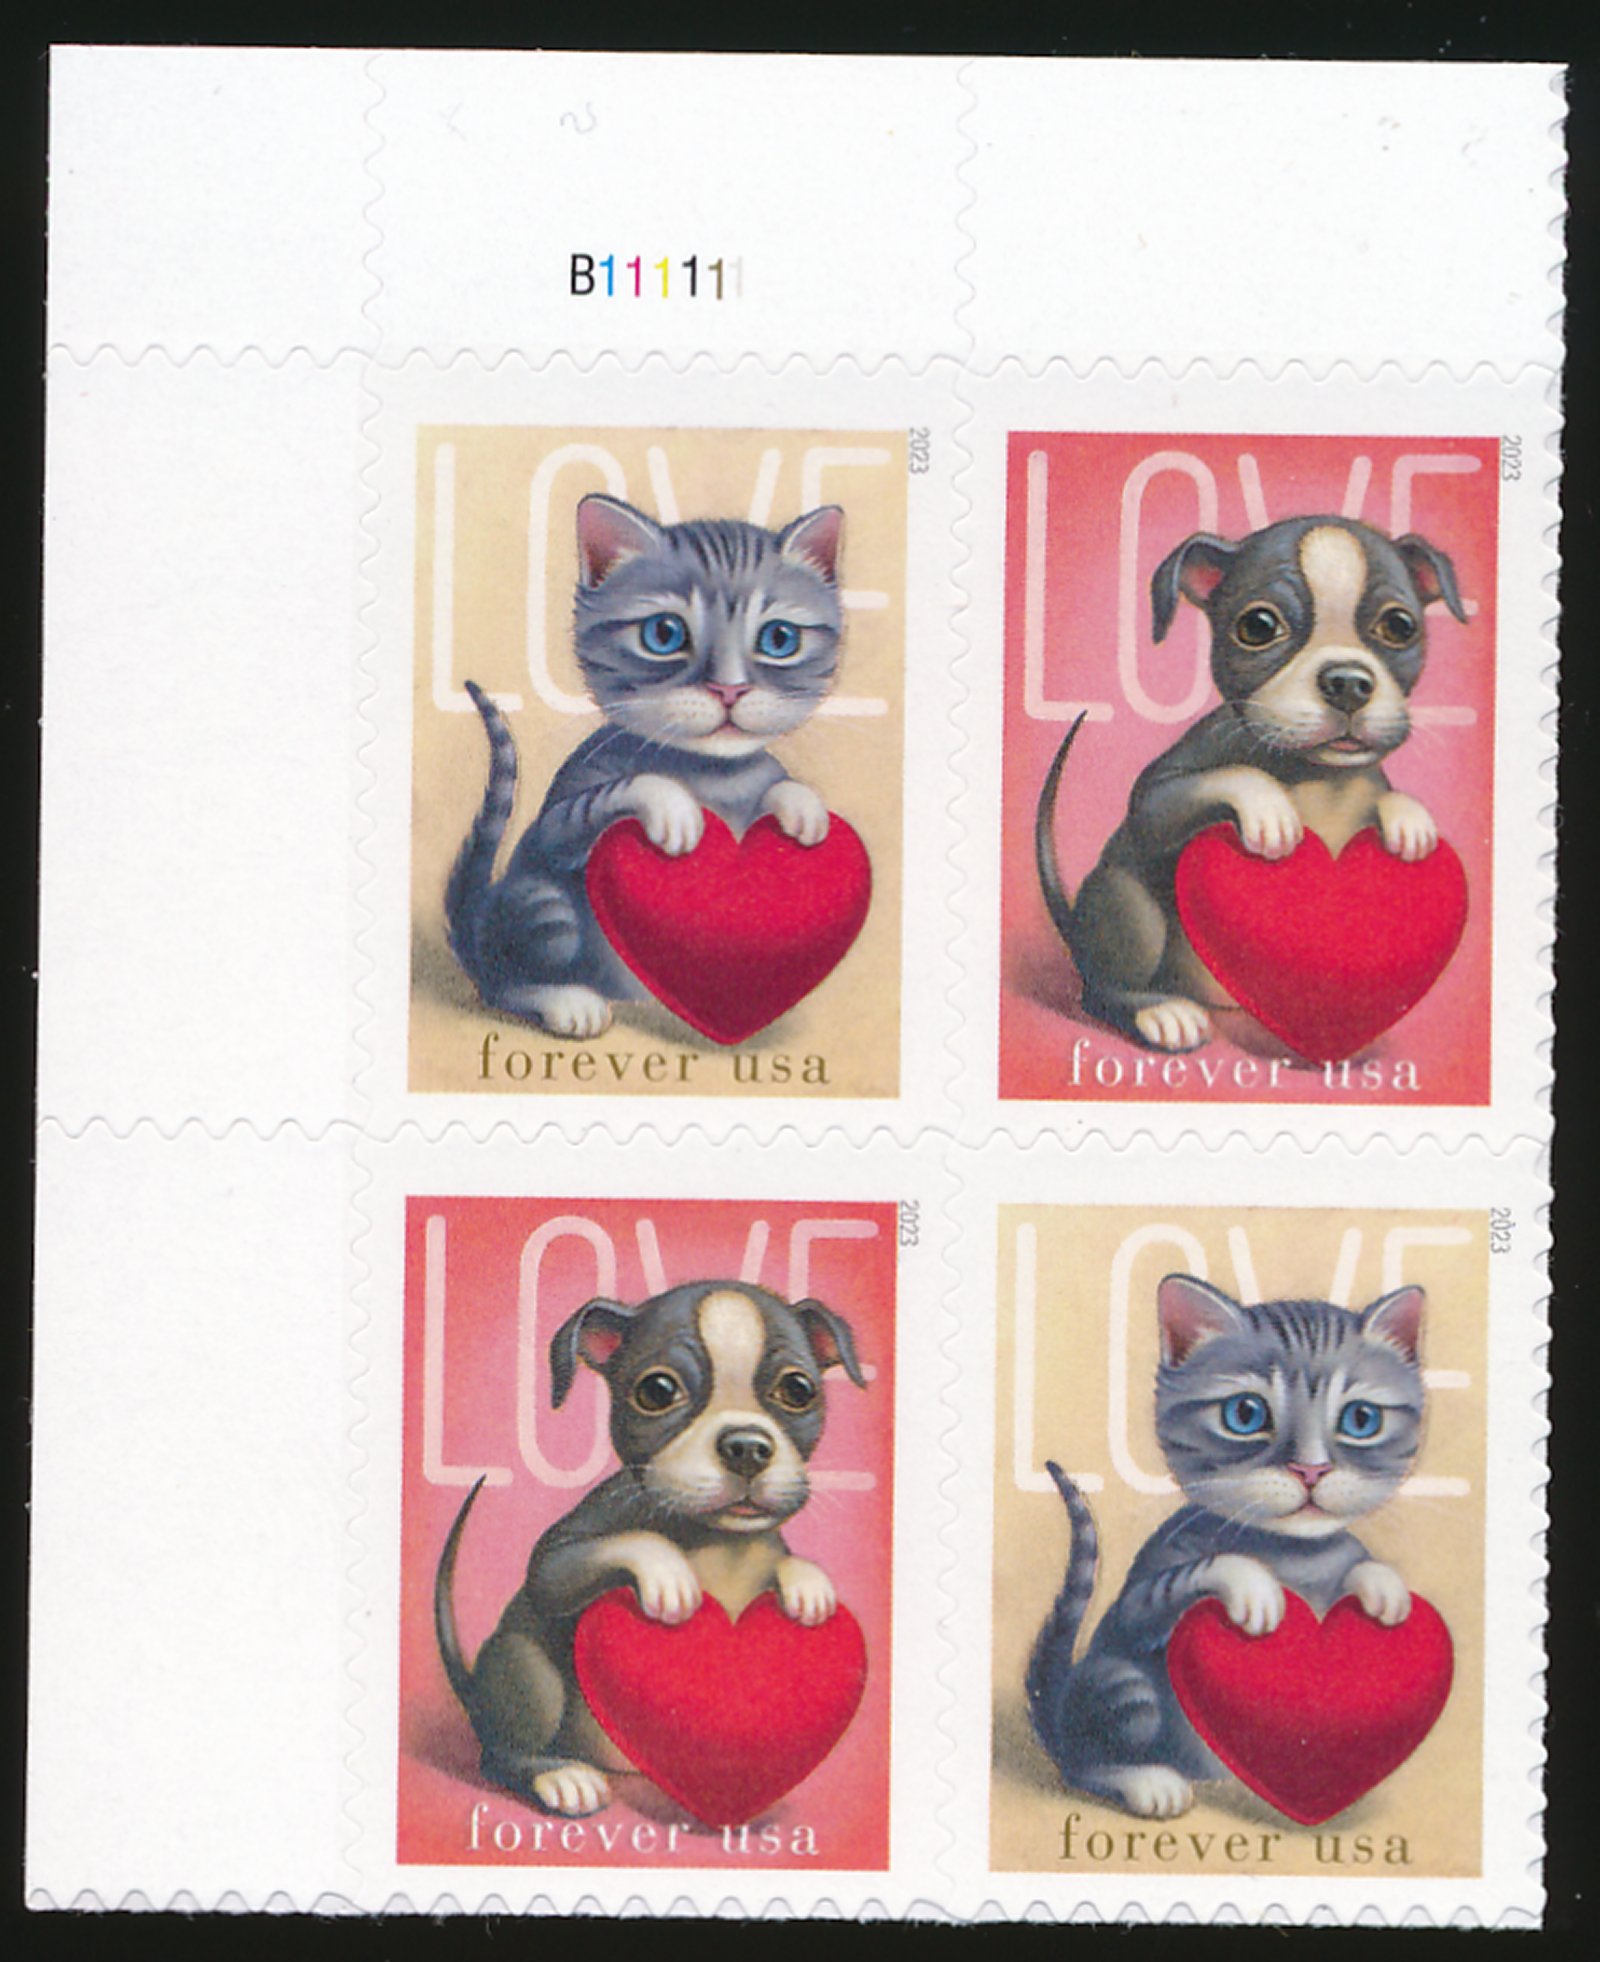 5745-46 .60 Love Cats and Dogs  Plate Block of 4 #5745-46pb